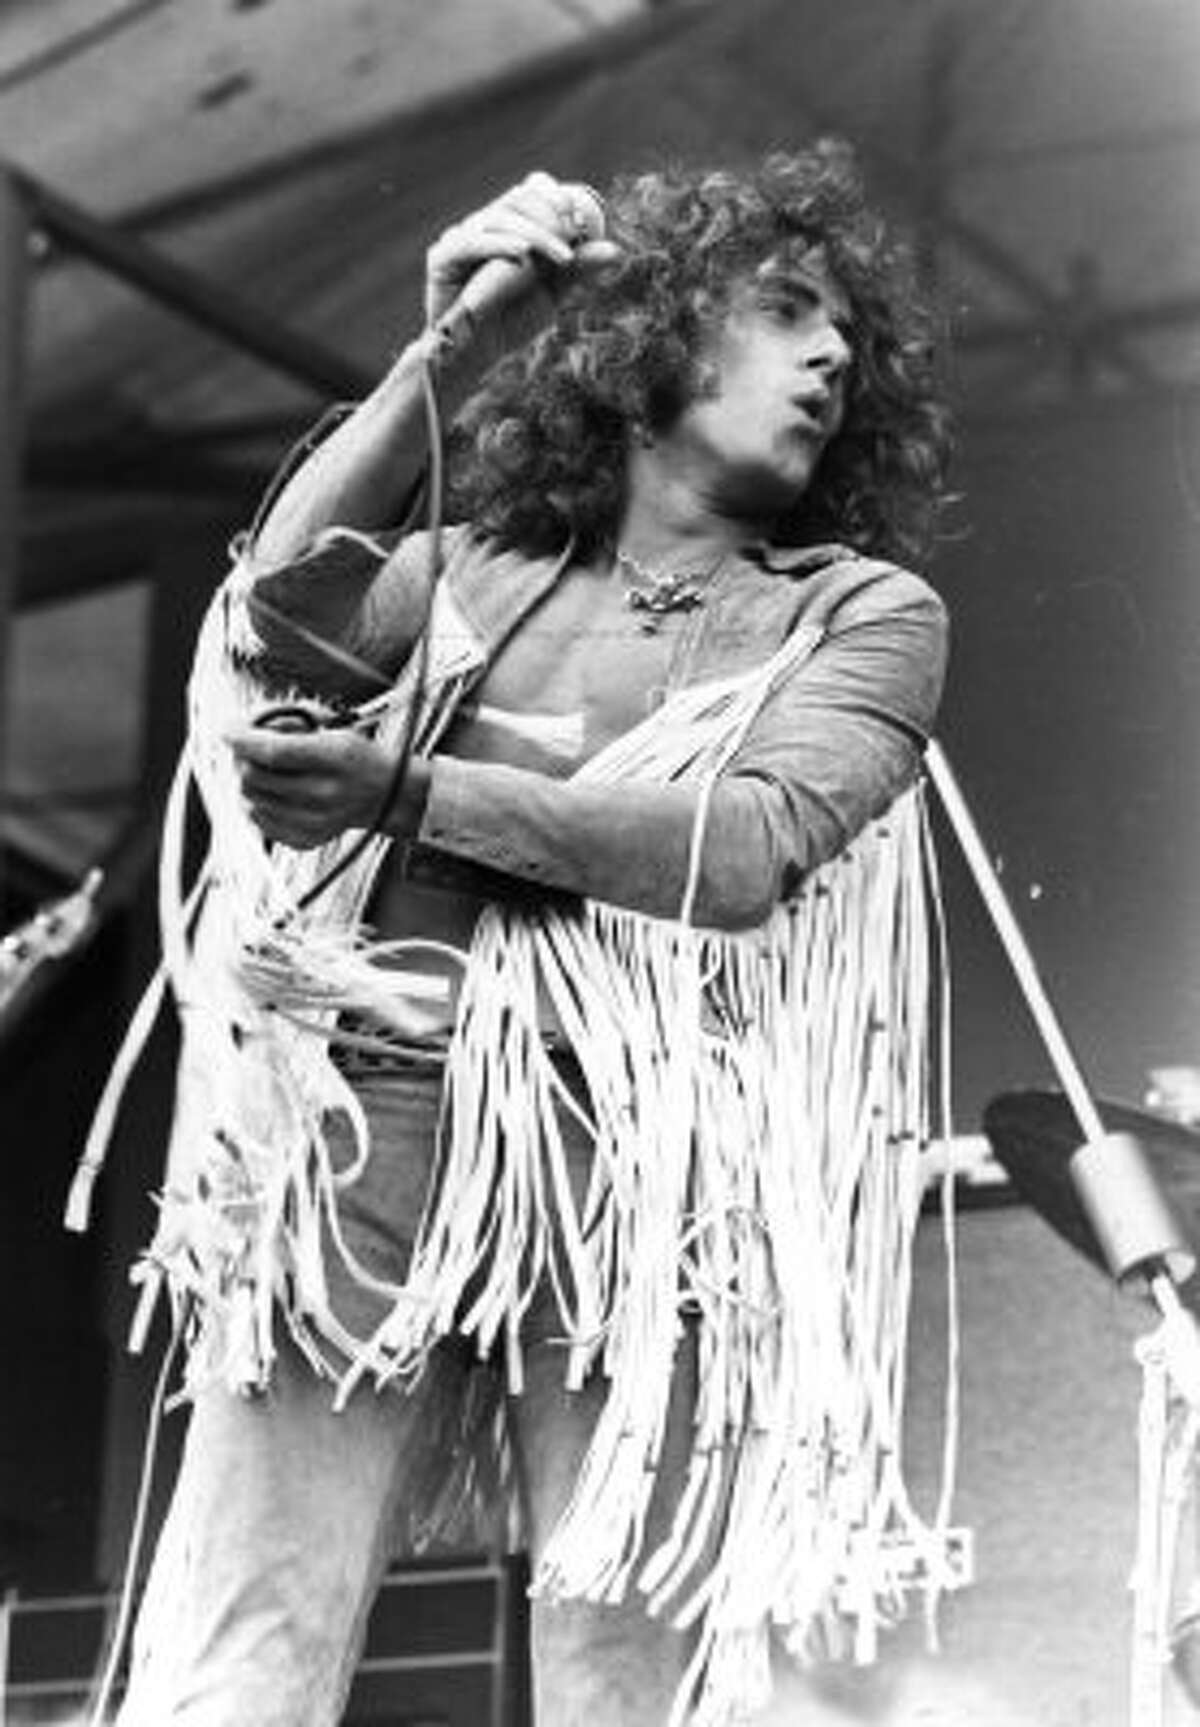 Daltrey was one of the three founding members of the The Who in the 1960s.